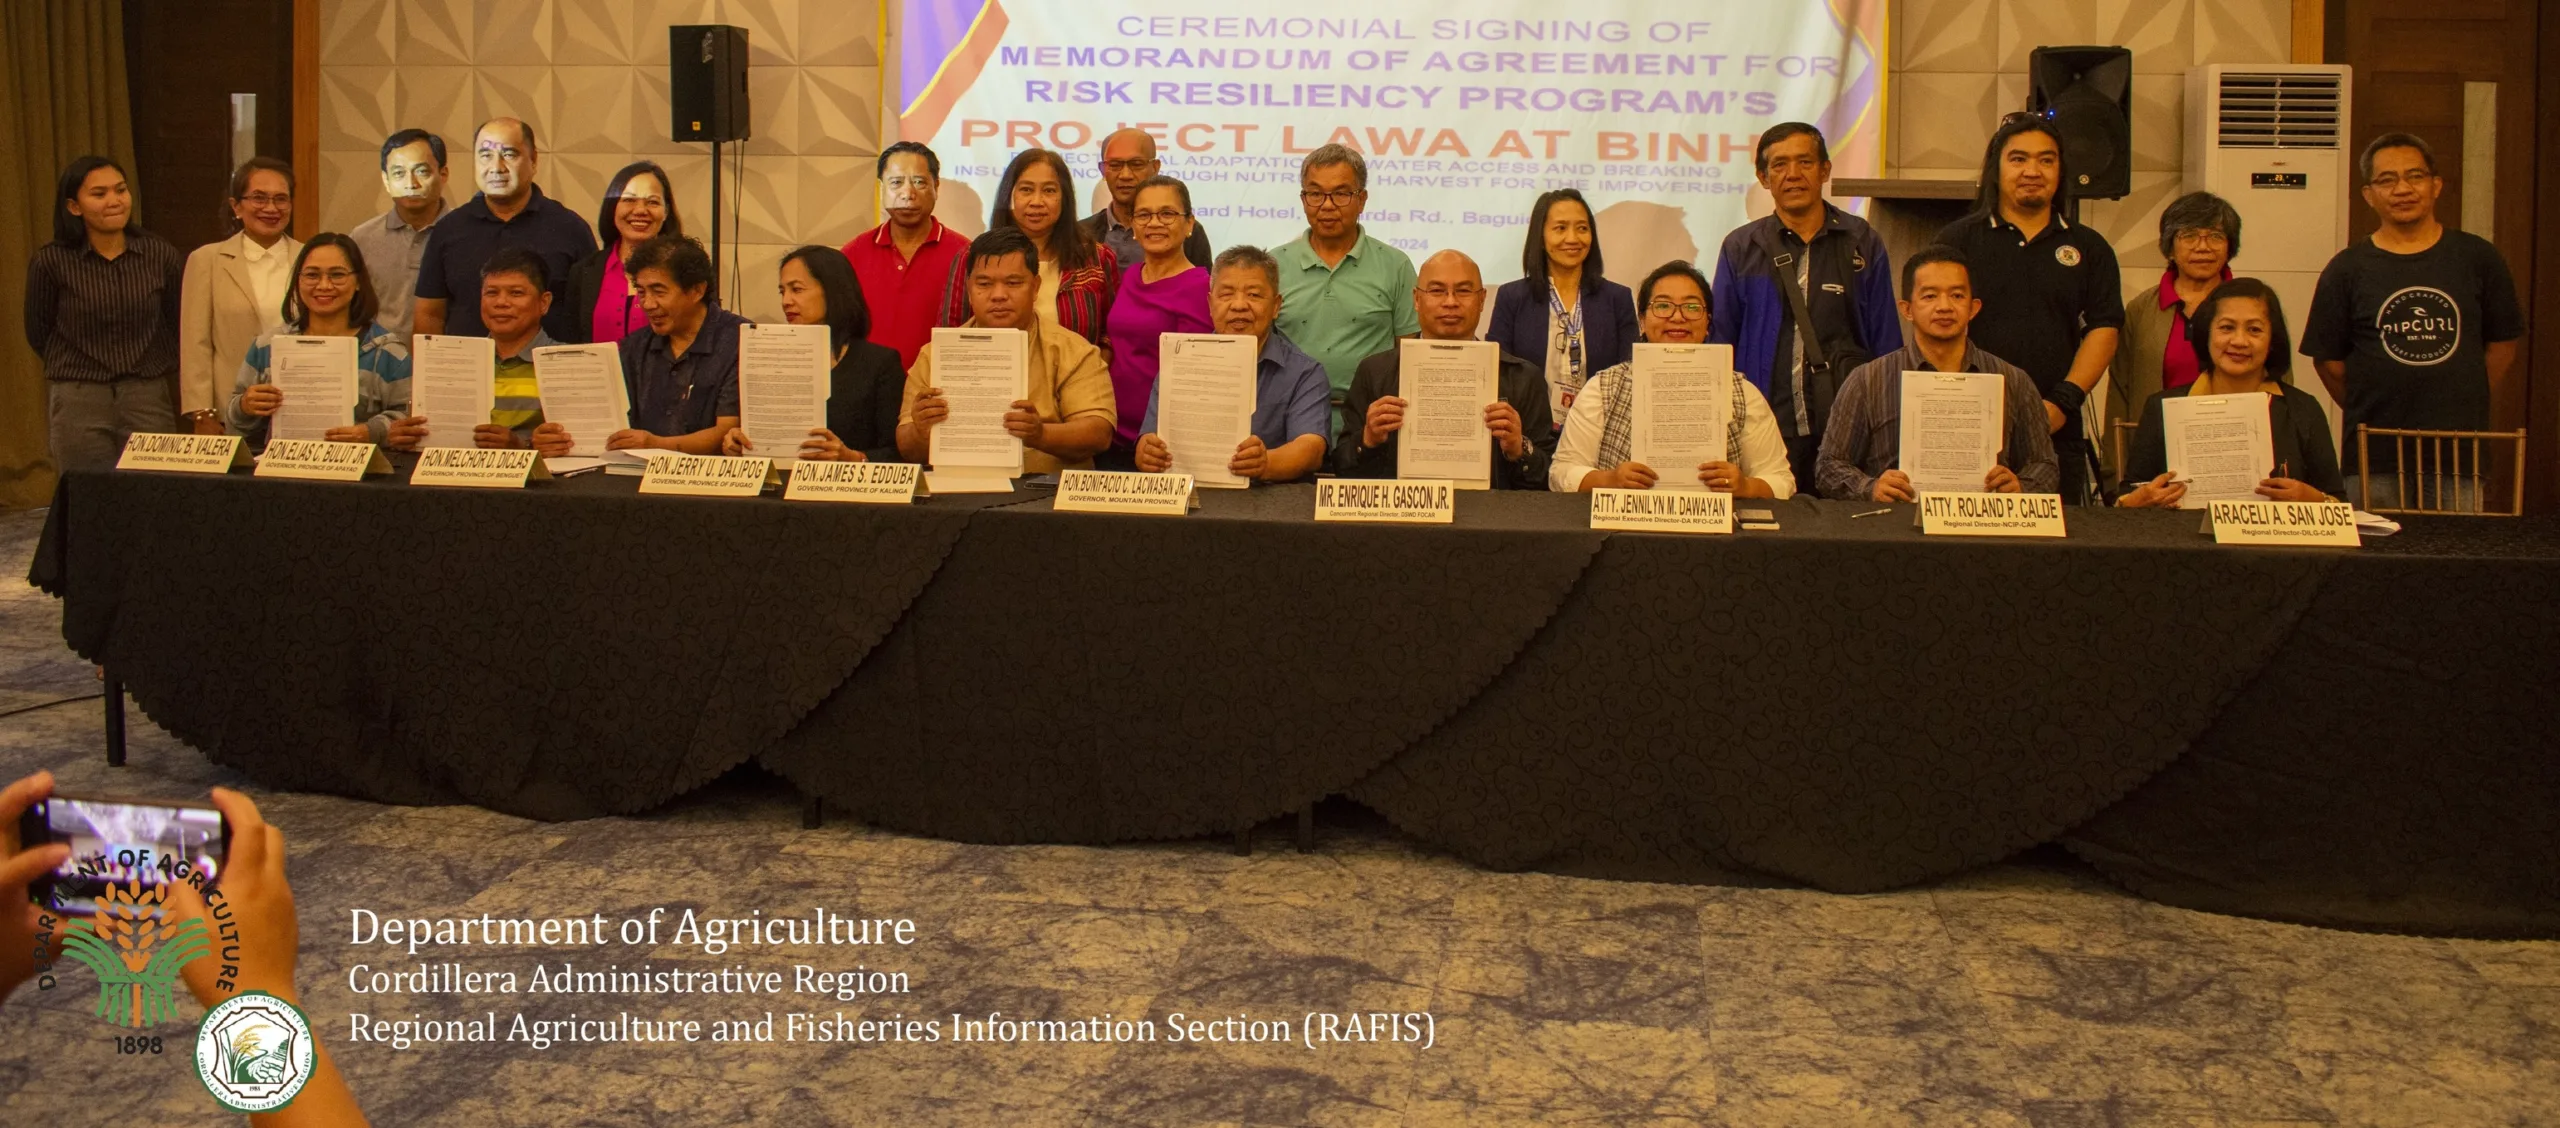 DA, DSWD sign MOA for Project LAWA, BINHI implementation in CAR  